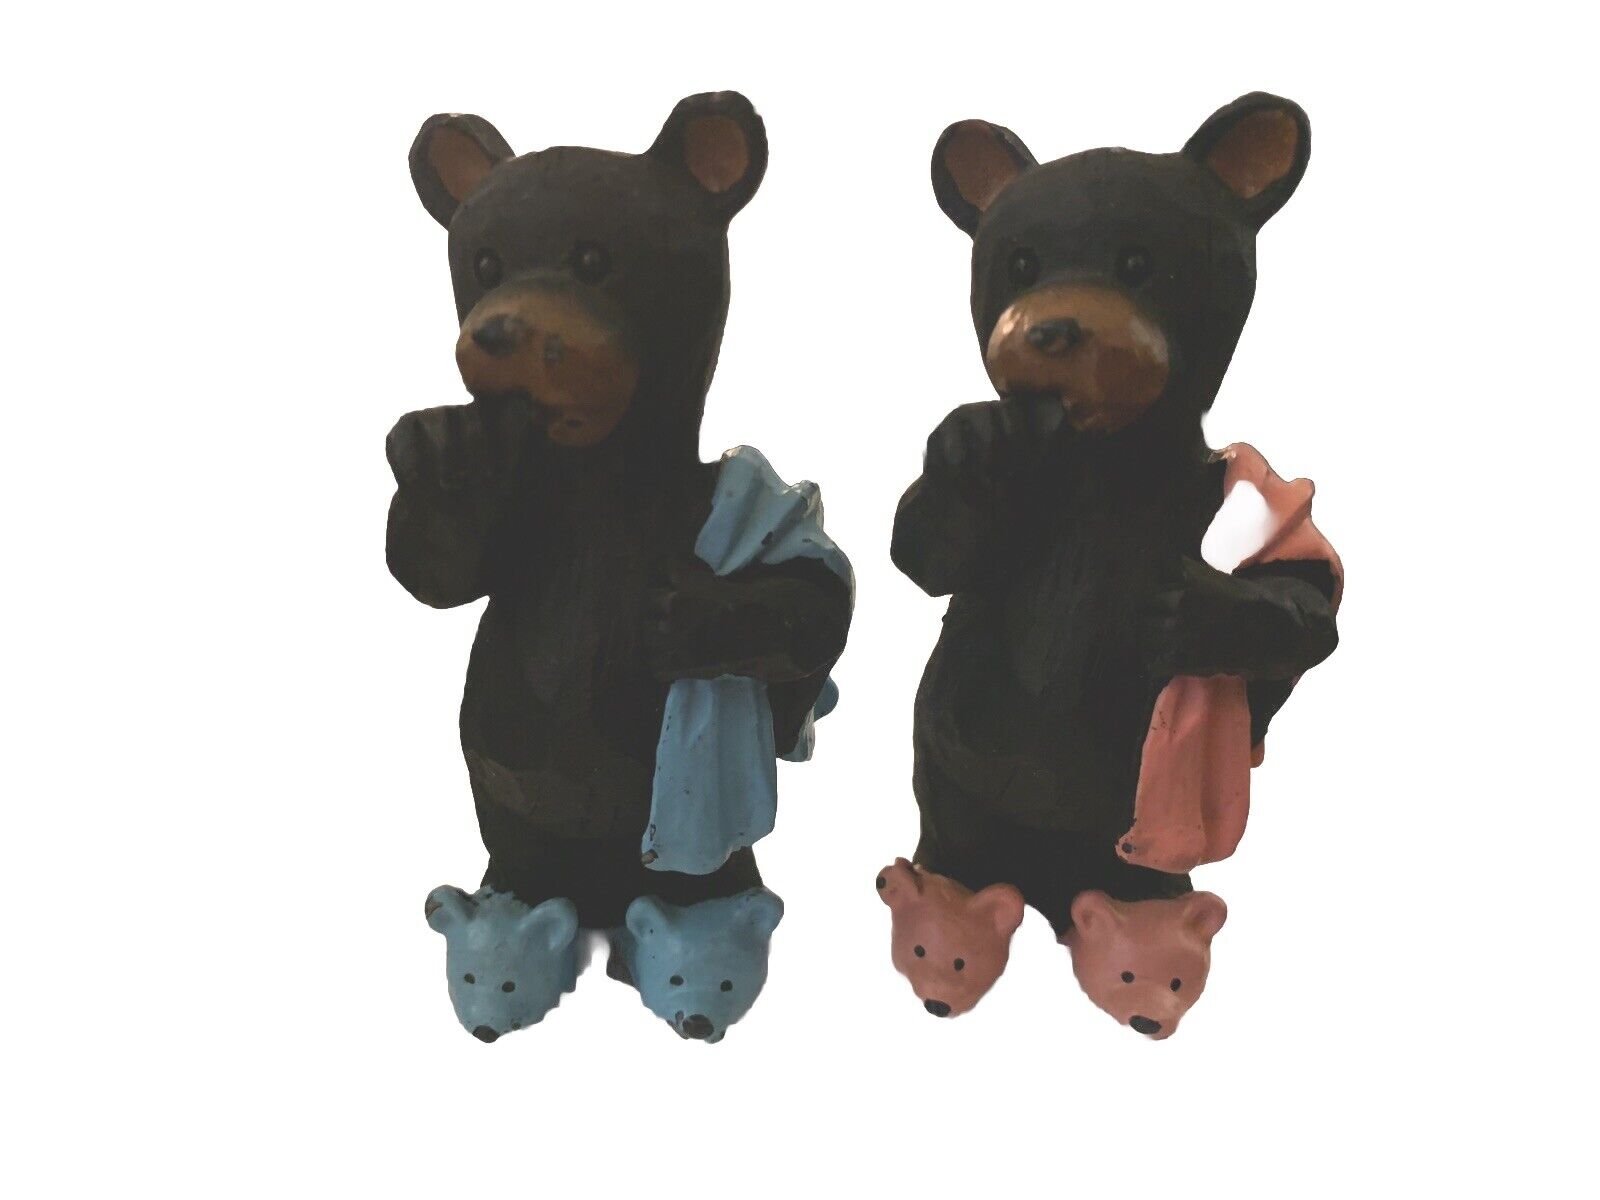 Baby Bears In Their P.J.’s